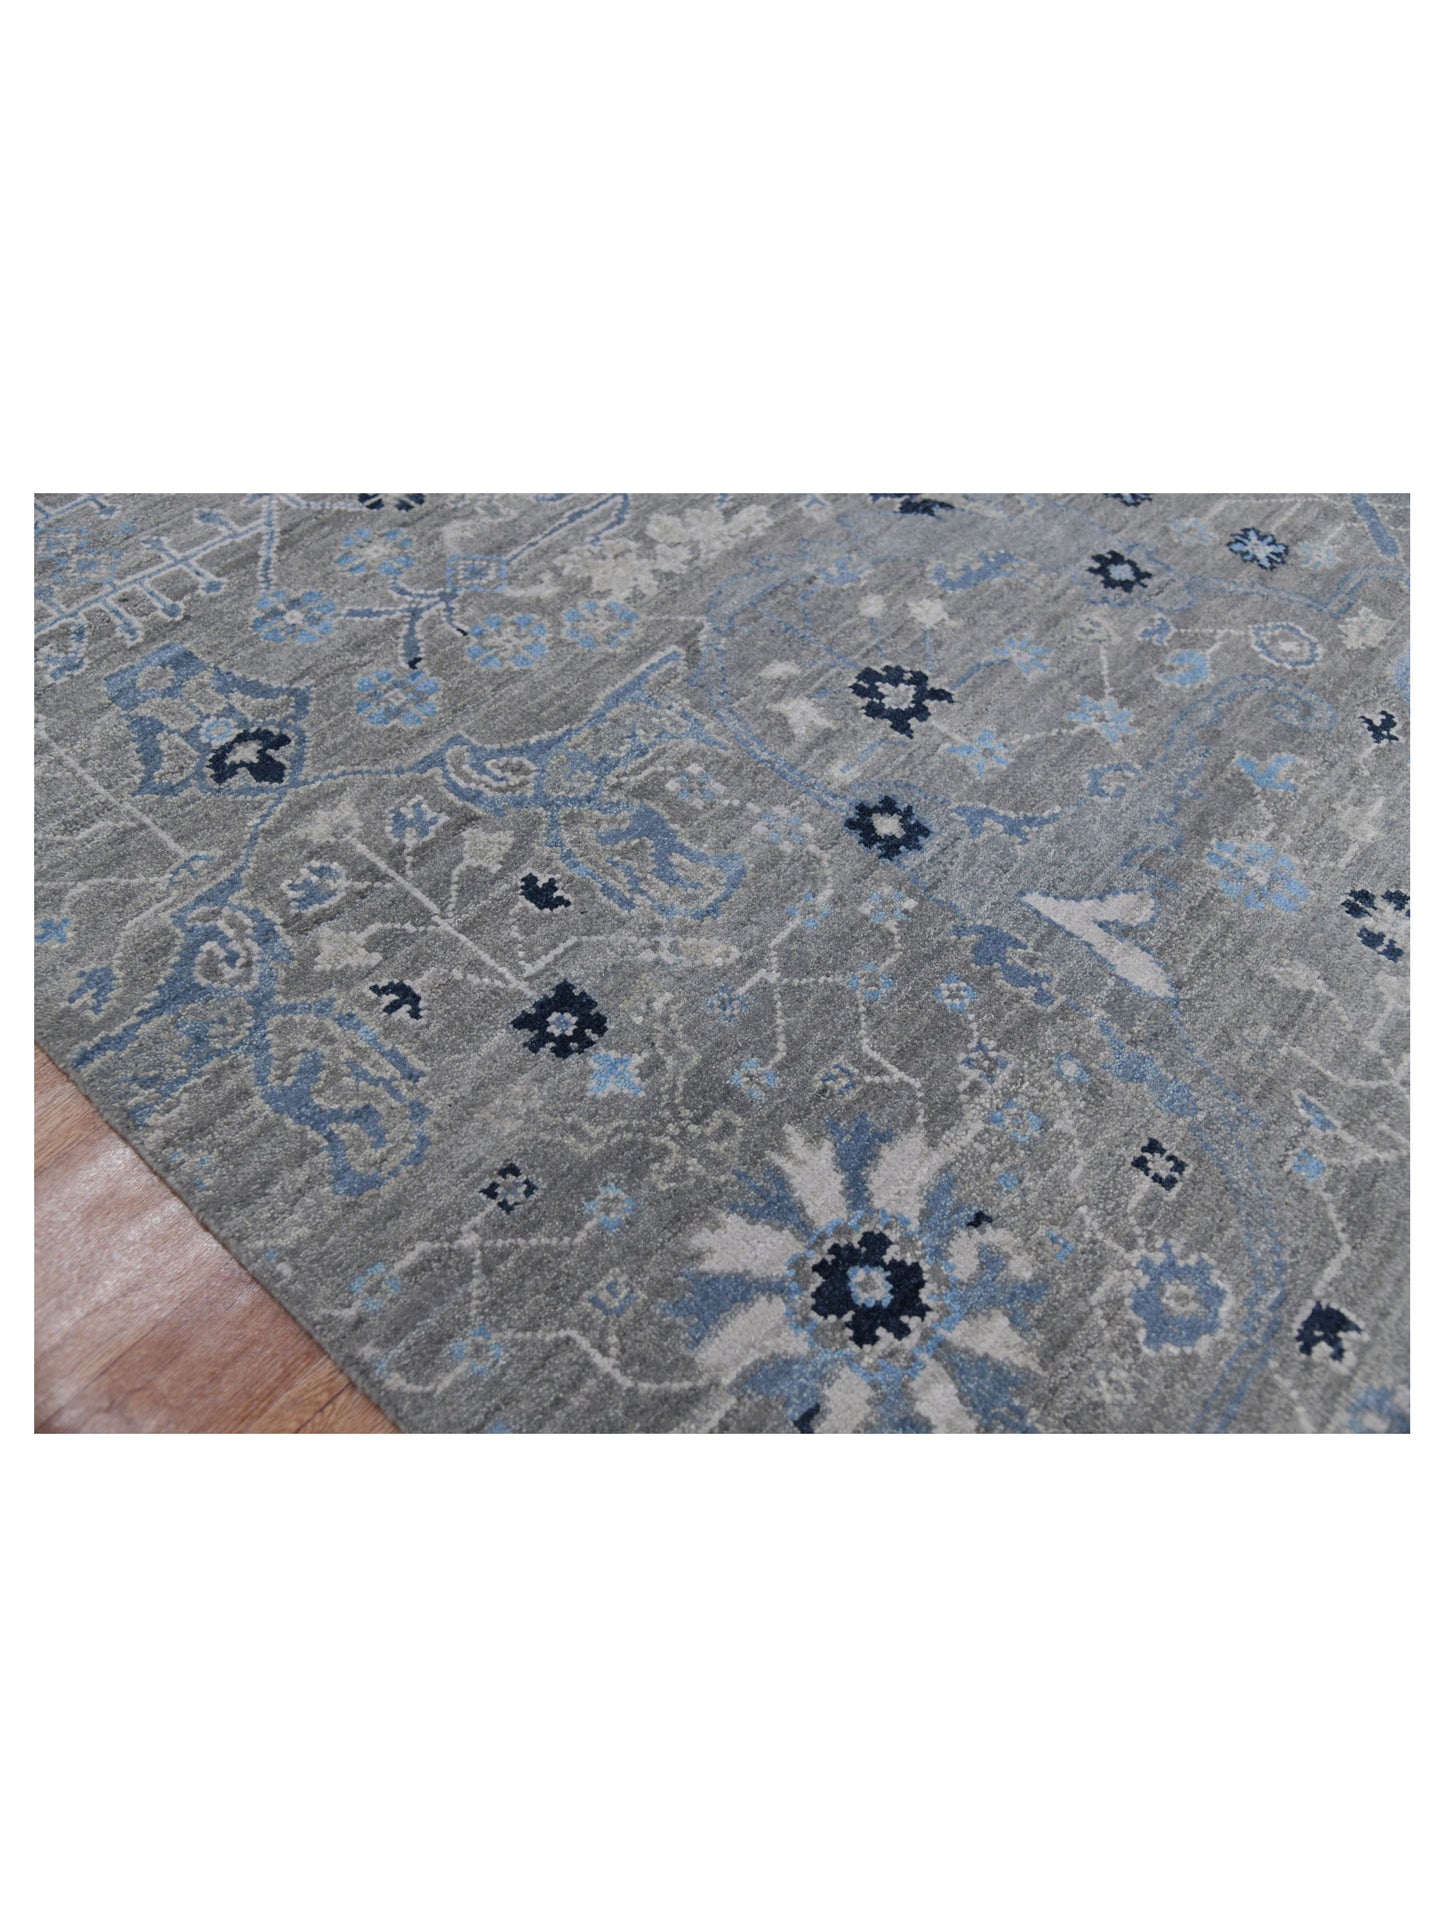 Limited Bailee BNS-200 SILVER SAND Traditional Knotted Rug